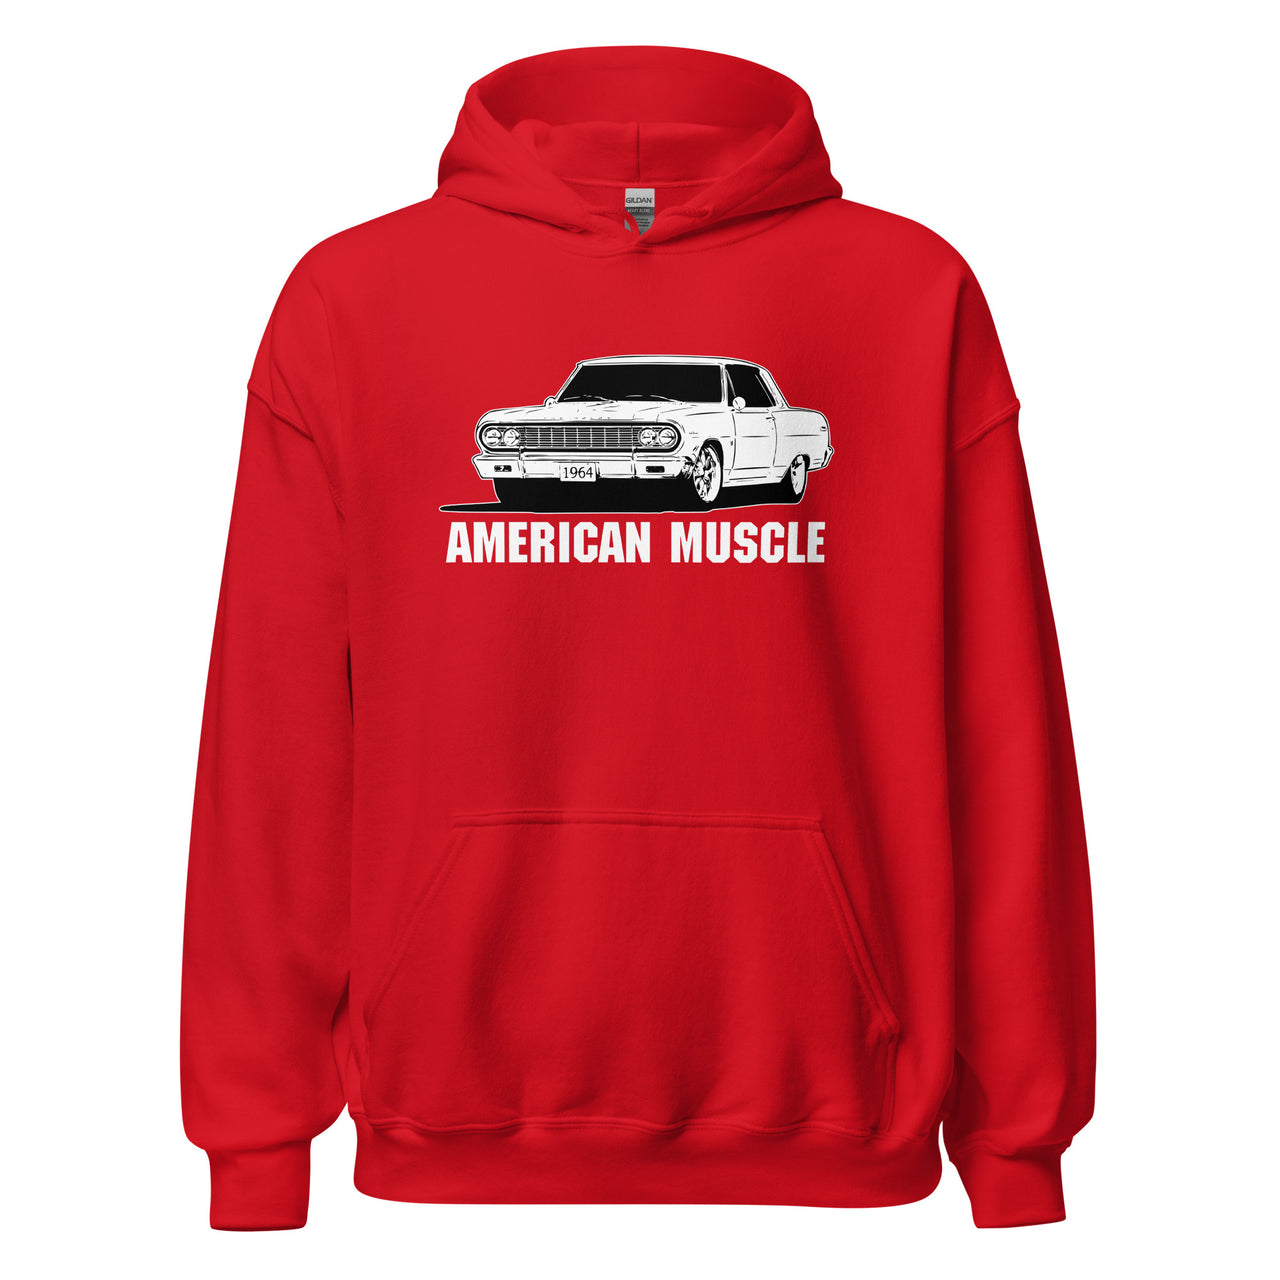 1964 Chevelle Hoodie in red